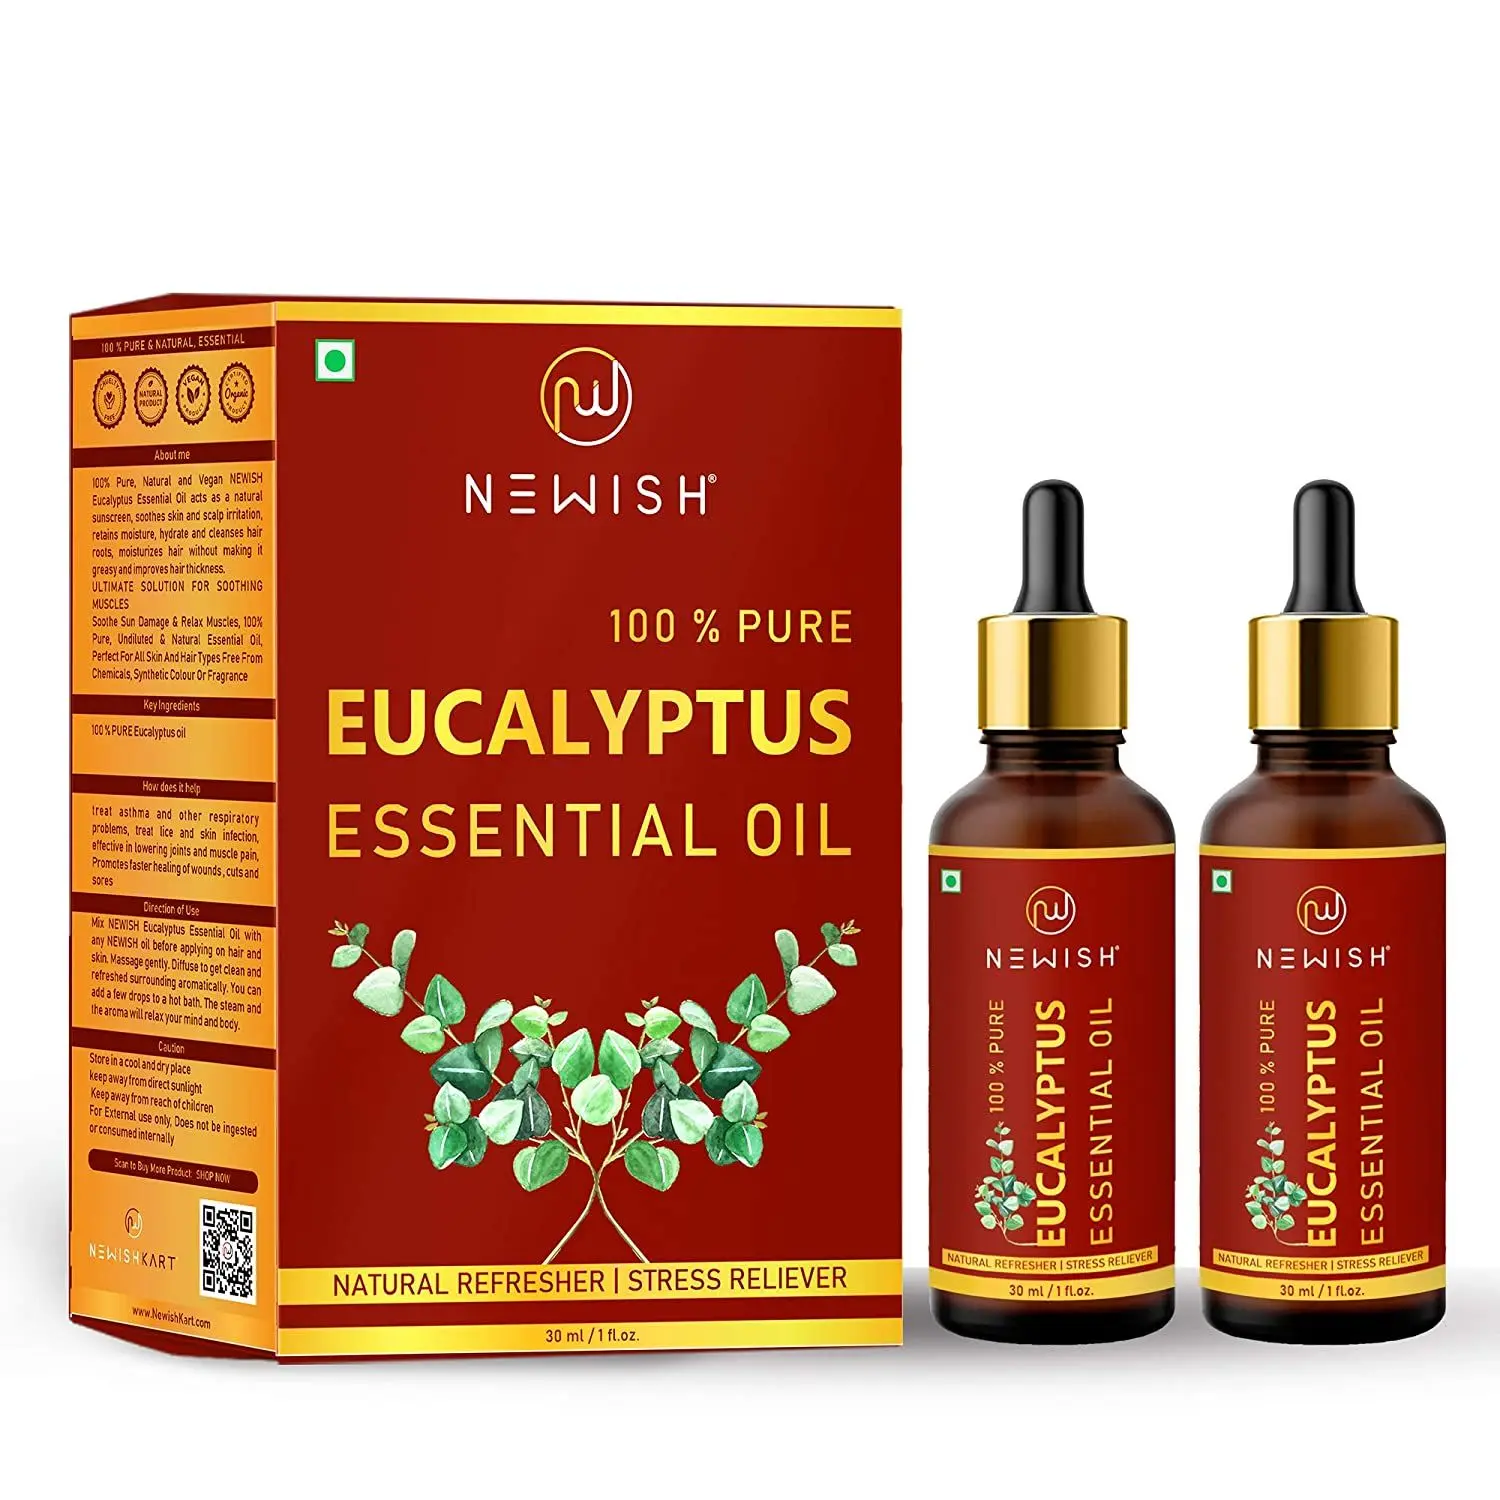 Newish® Eucalyptus Oil for Cold & Cough for Steam Inhalation - 30 ml | 100% Pure & Natural Eucalyptus Essential Oil for Steam, Hair, Pain Relief & Diffuser | Undiluted, Natural Aromatherapy, Therapeutic Grade 30ml - Pack of 2